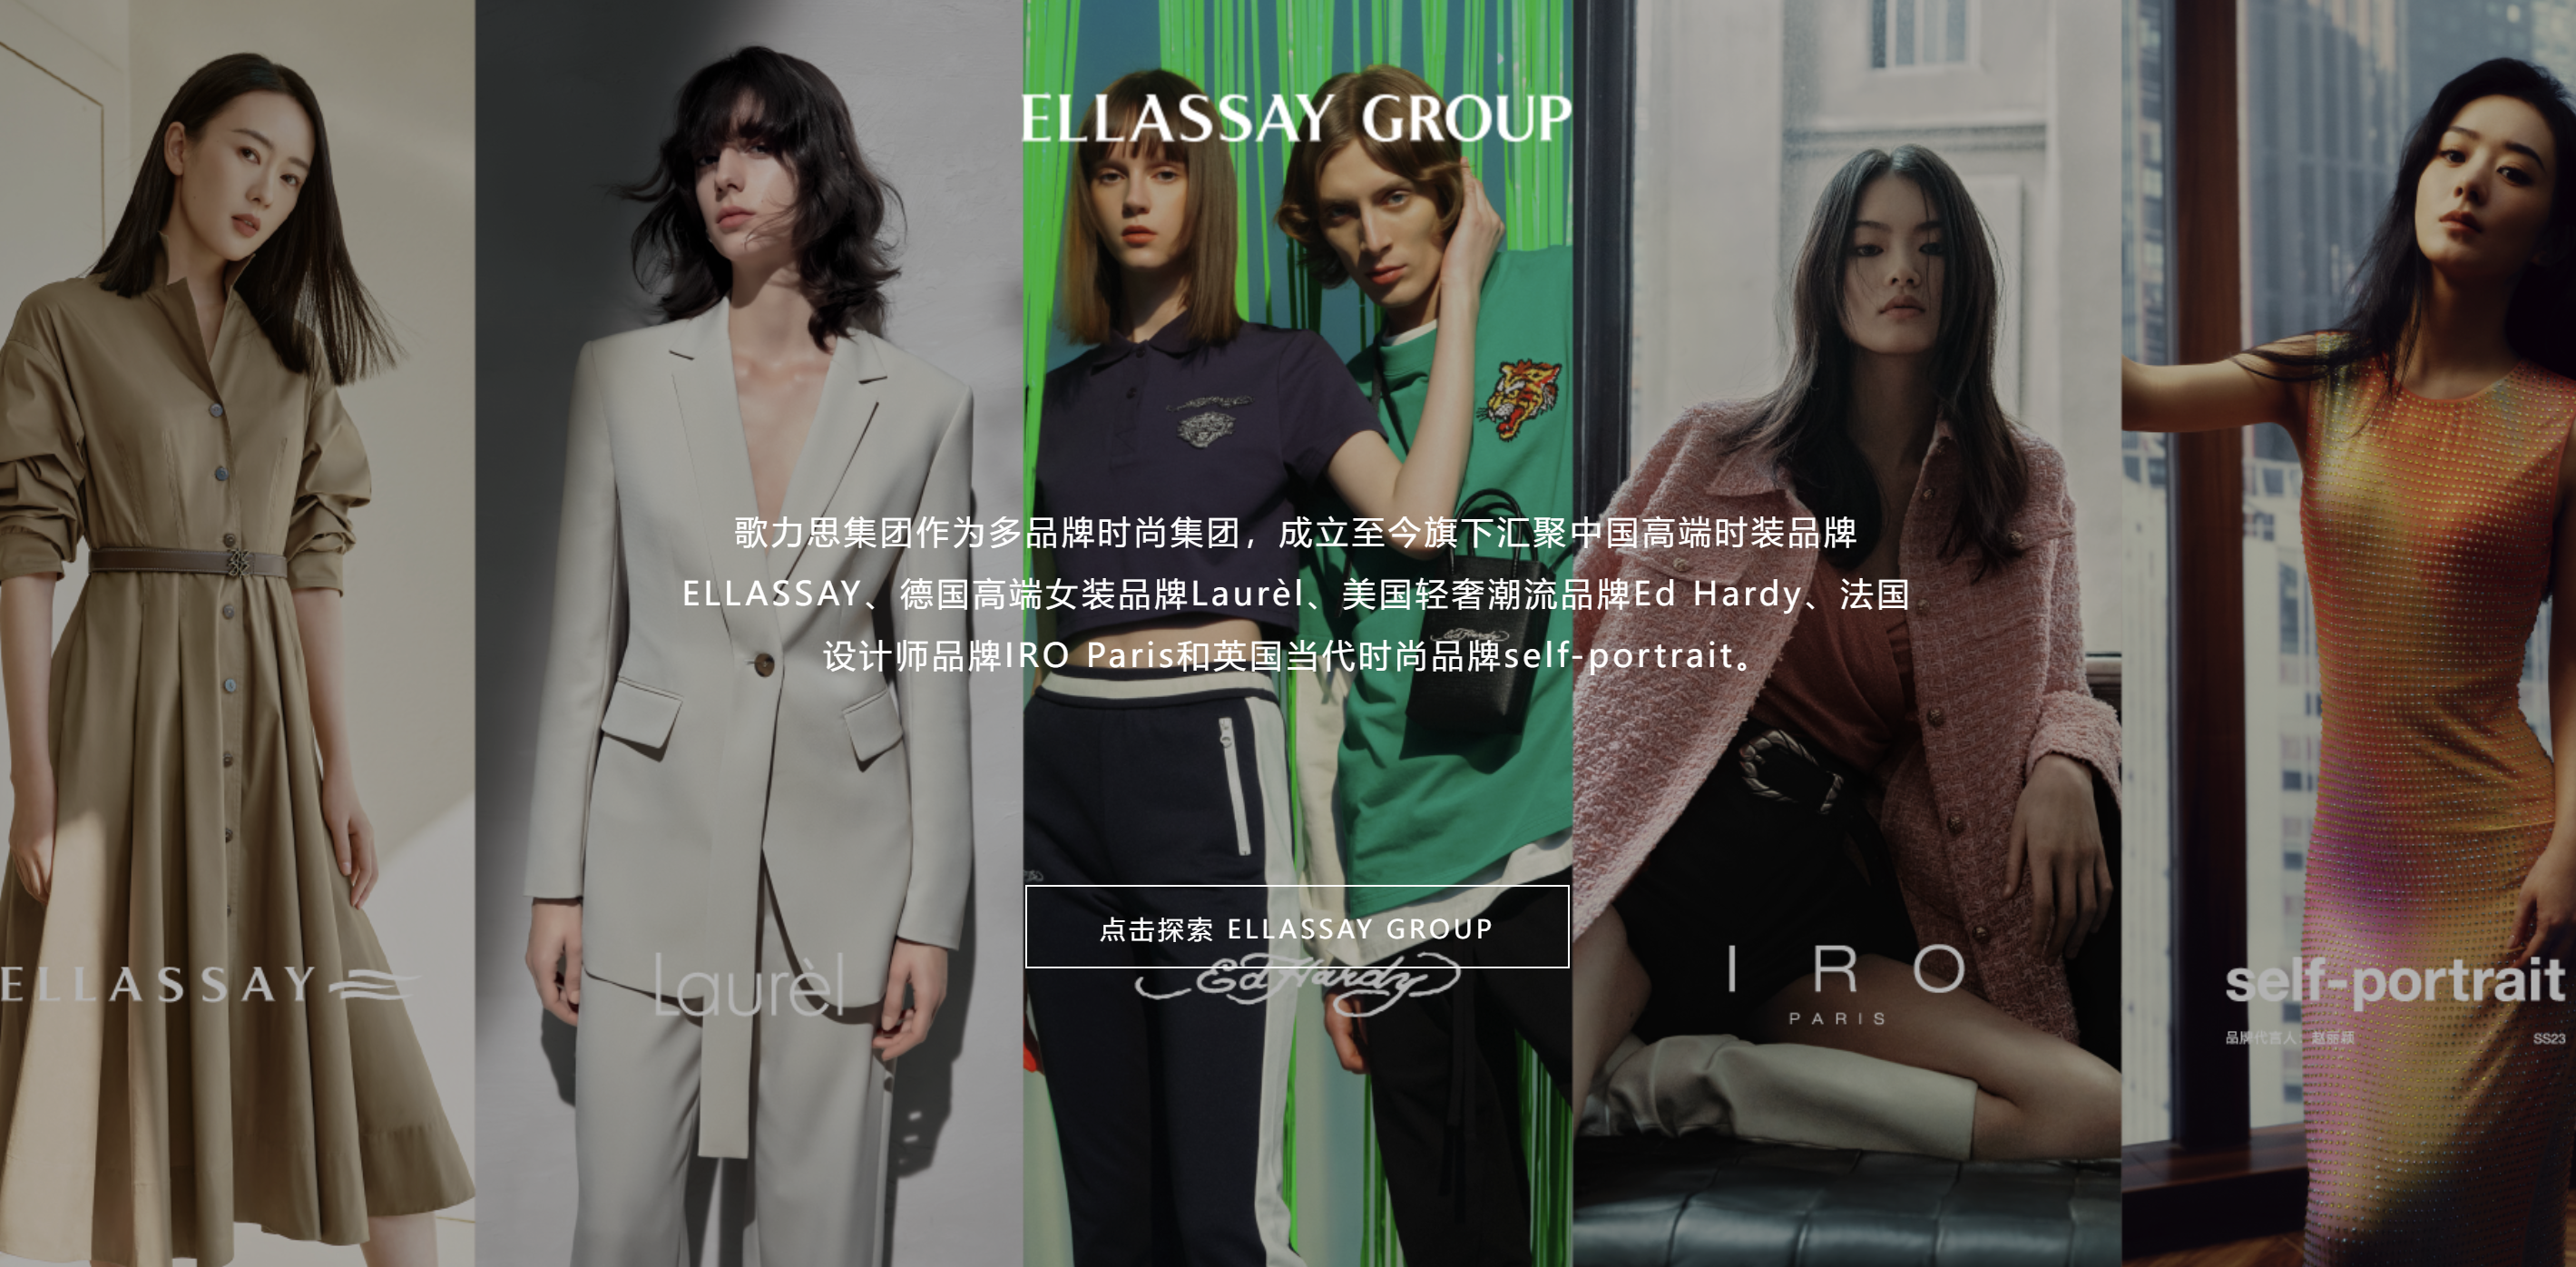 ELLASSAY Expects Revenue to Exceed 1.3 Billion Yuan in the First Half of the Year, with Outstanding Performance from Self-Portrait, Laurèl, and IRO Paris